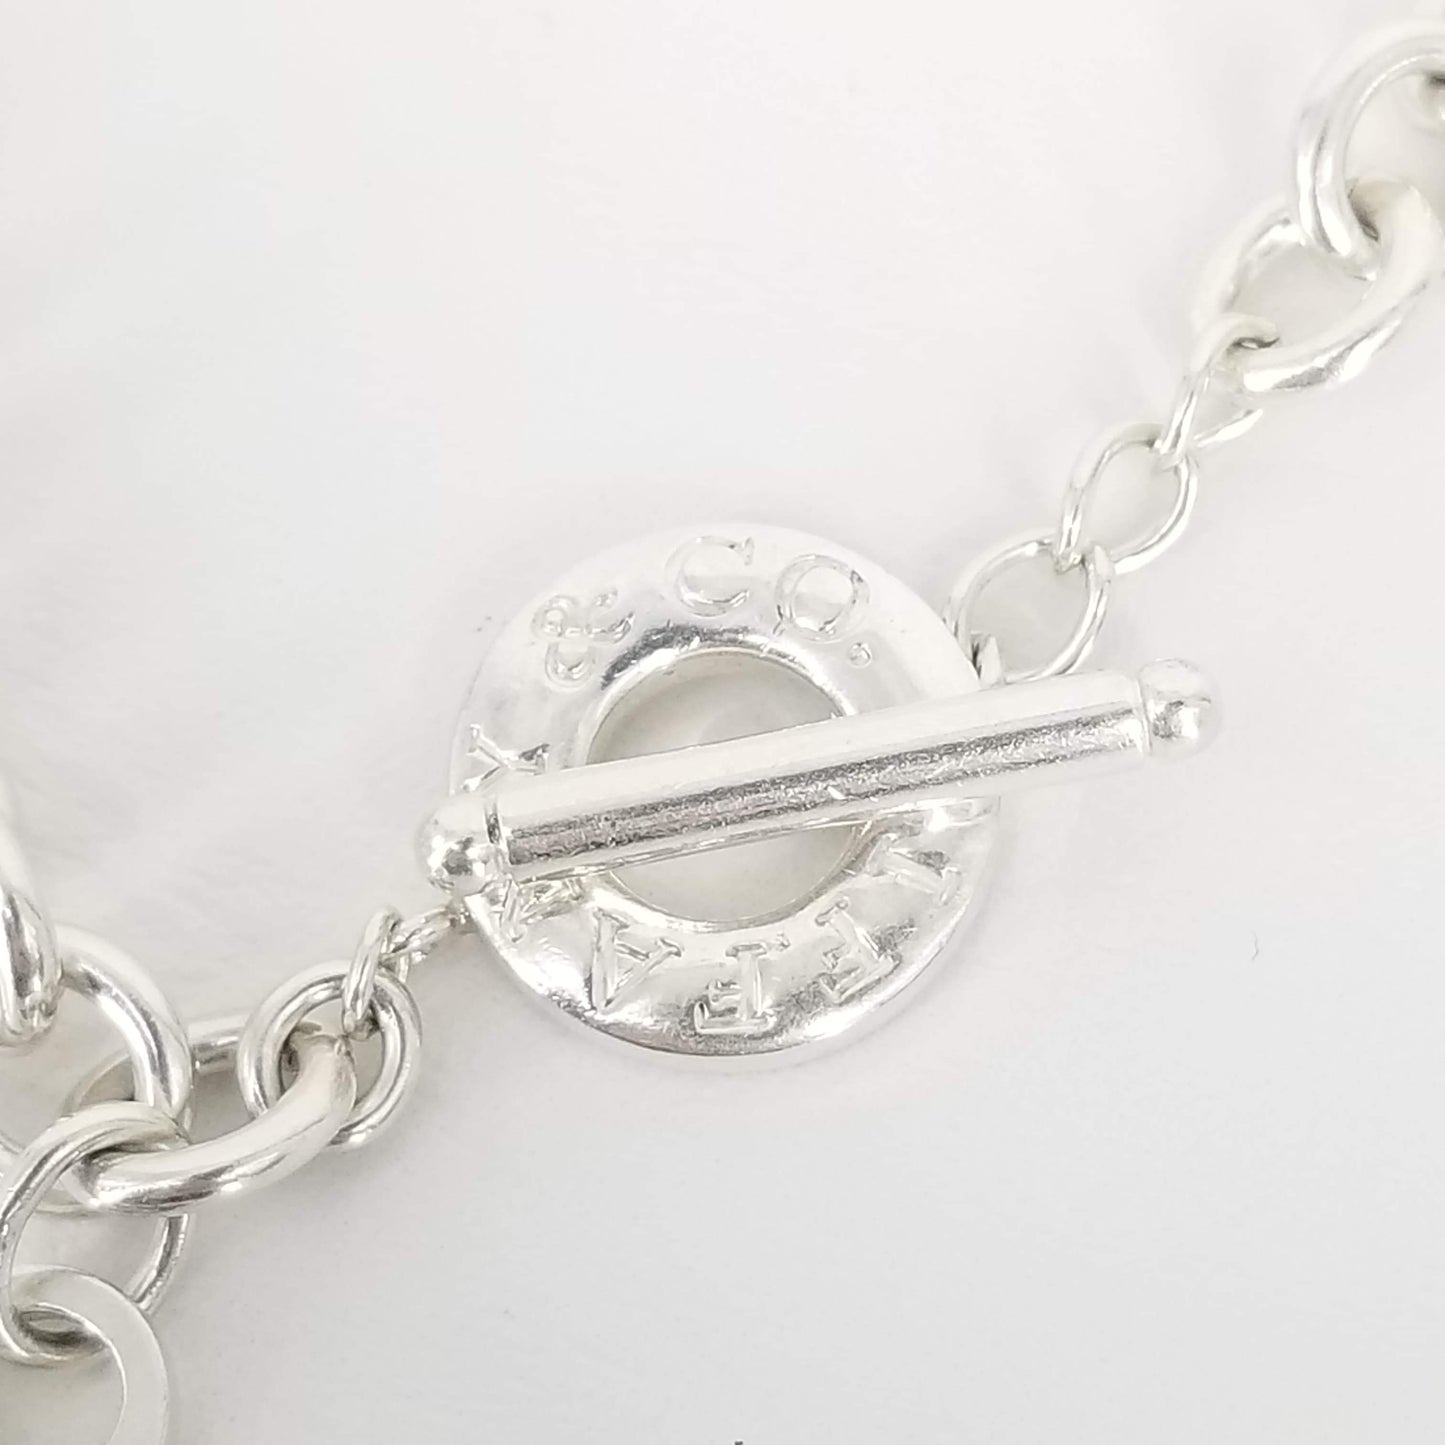 Authentic Tiffany & Co Silver Toggle Heart Necklace